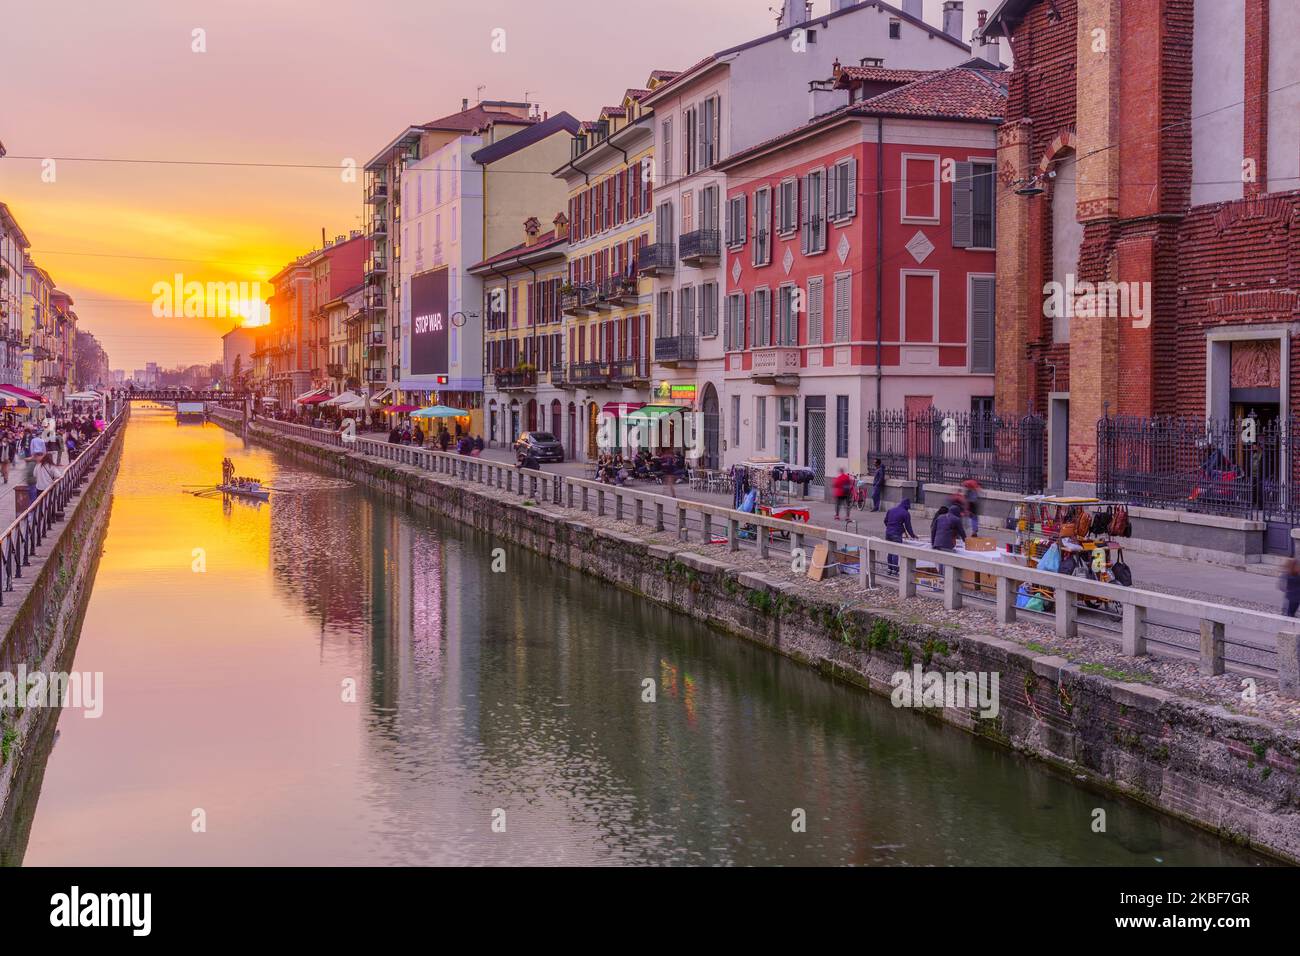 Milan, Italy - March 02, 2022: Sunset view of the Naviglio Grande canal, with locals and visitors, in Navigli, Milan, Lombardy, Northern Italy Stock Photo